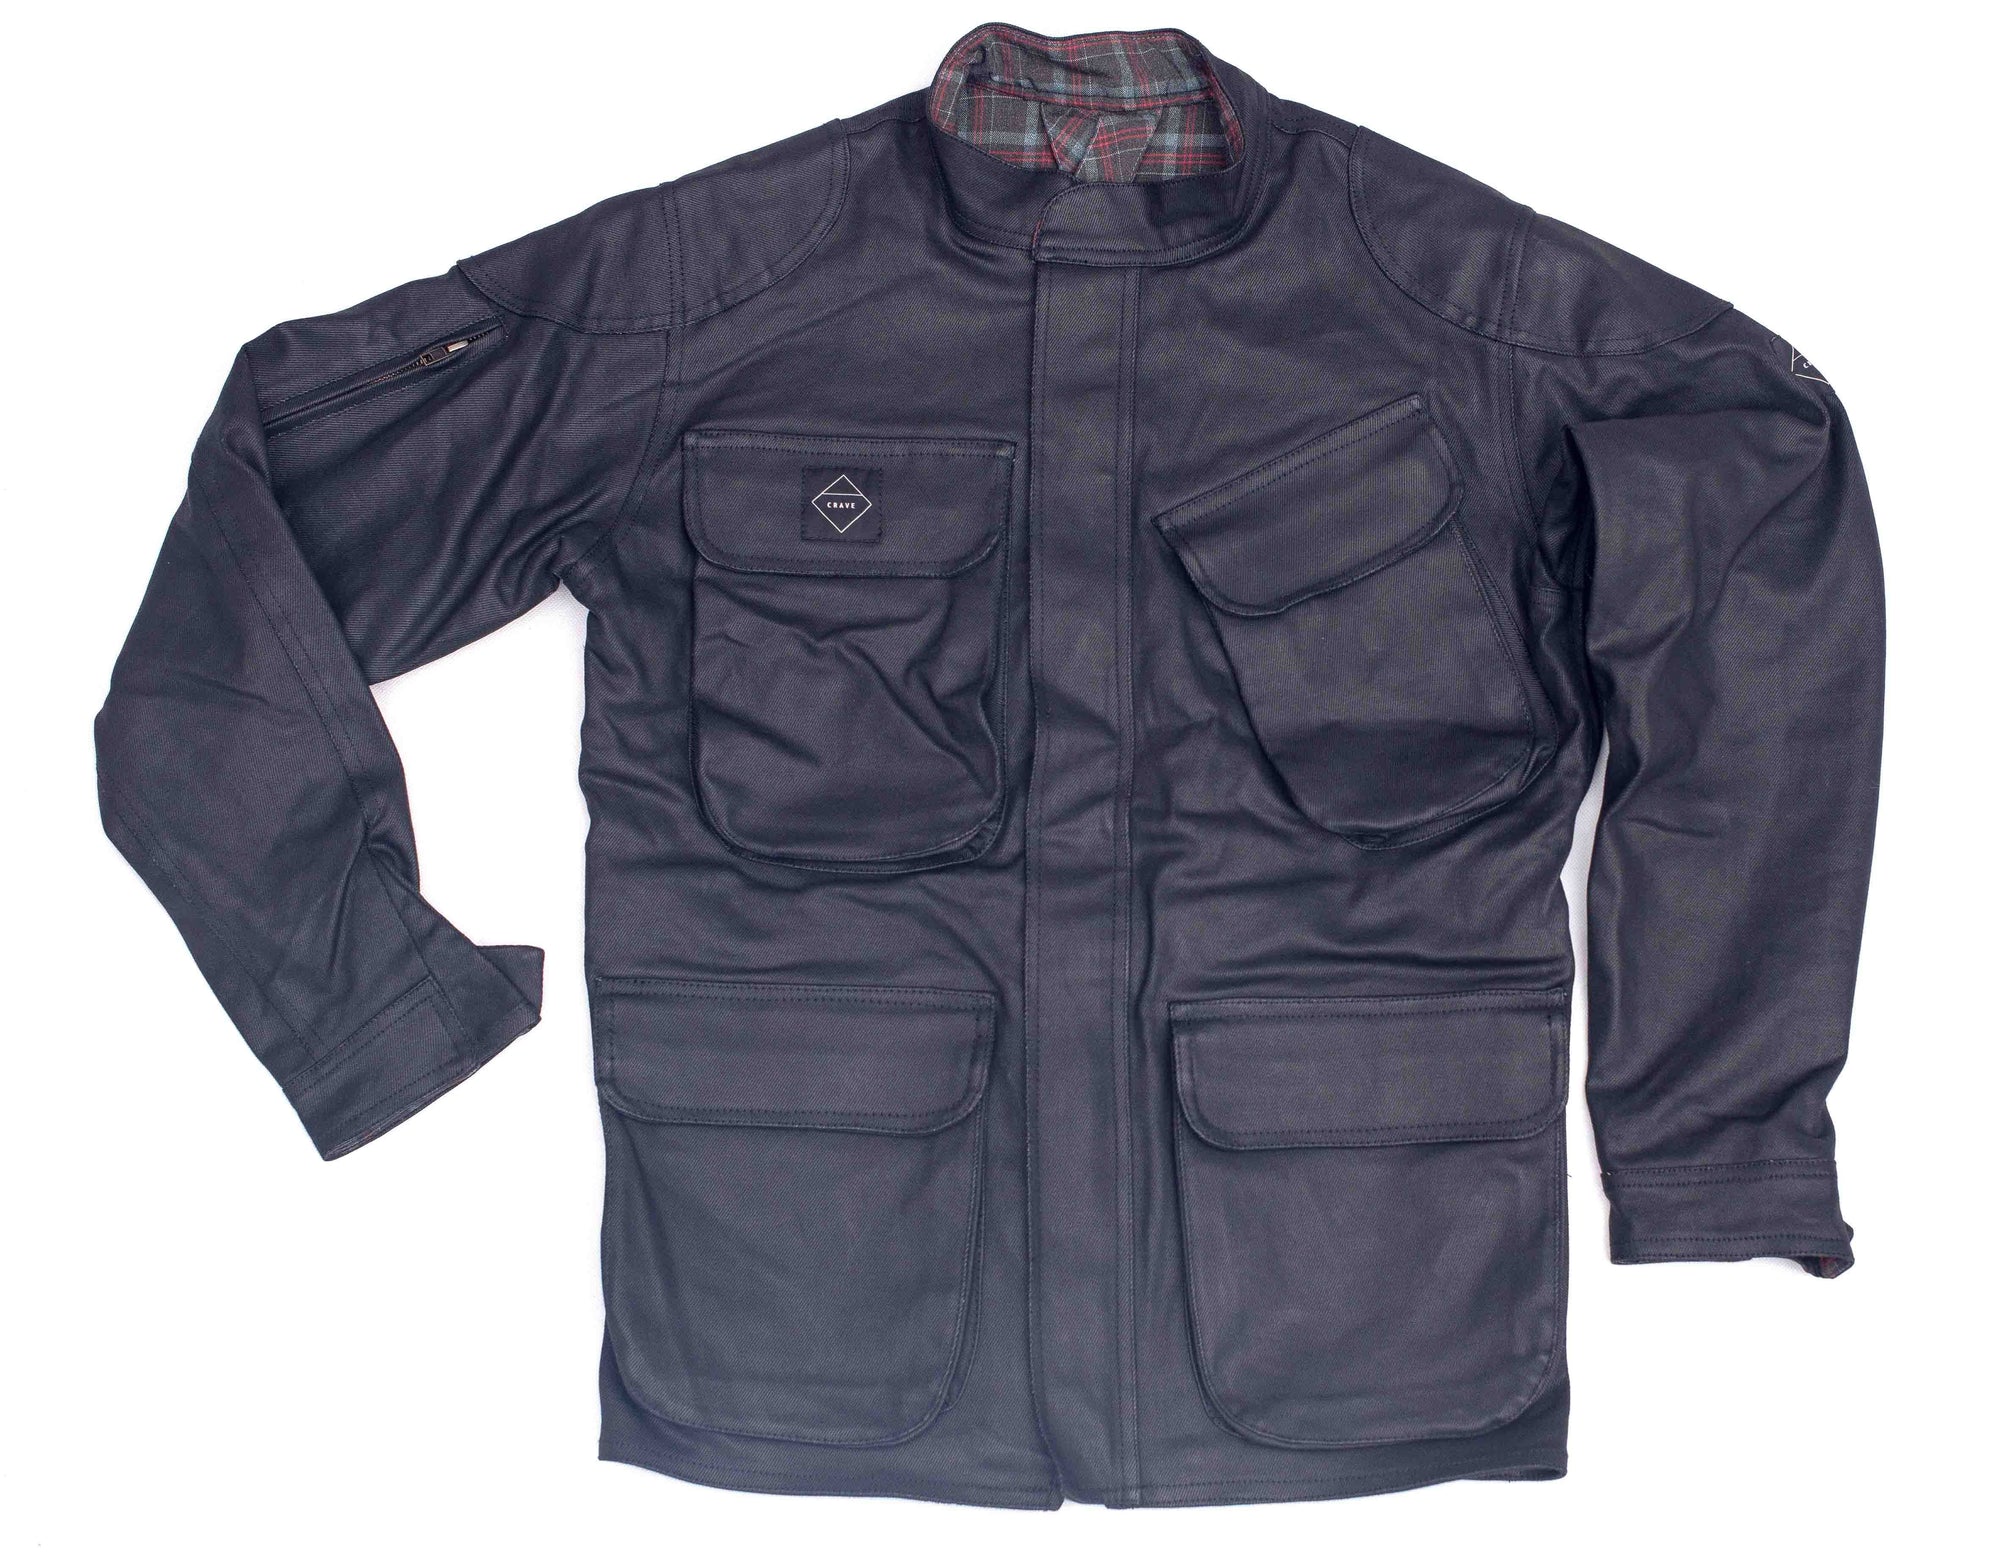 Crave Waxed Trophy Armalith Riding Jacket